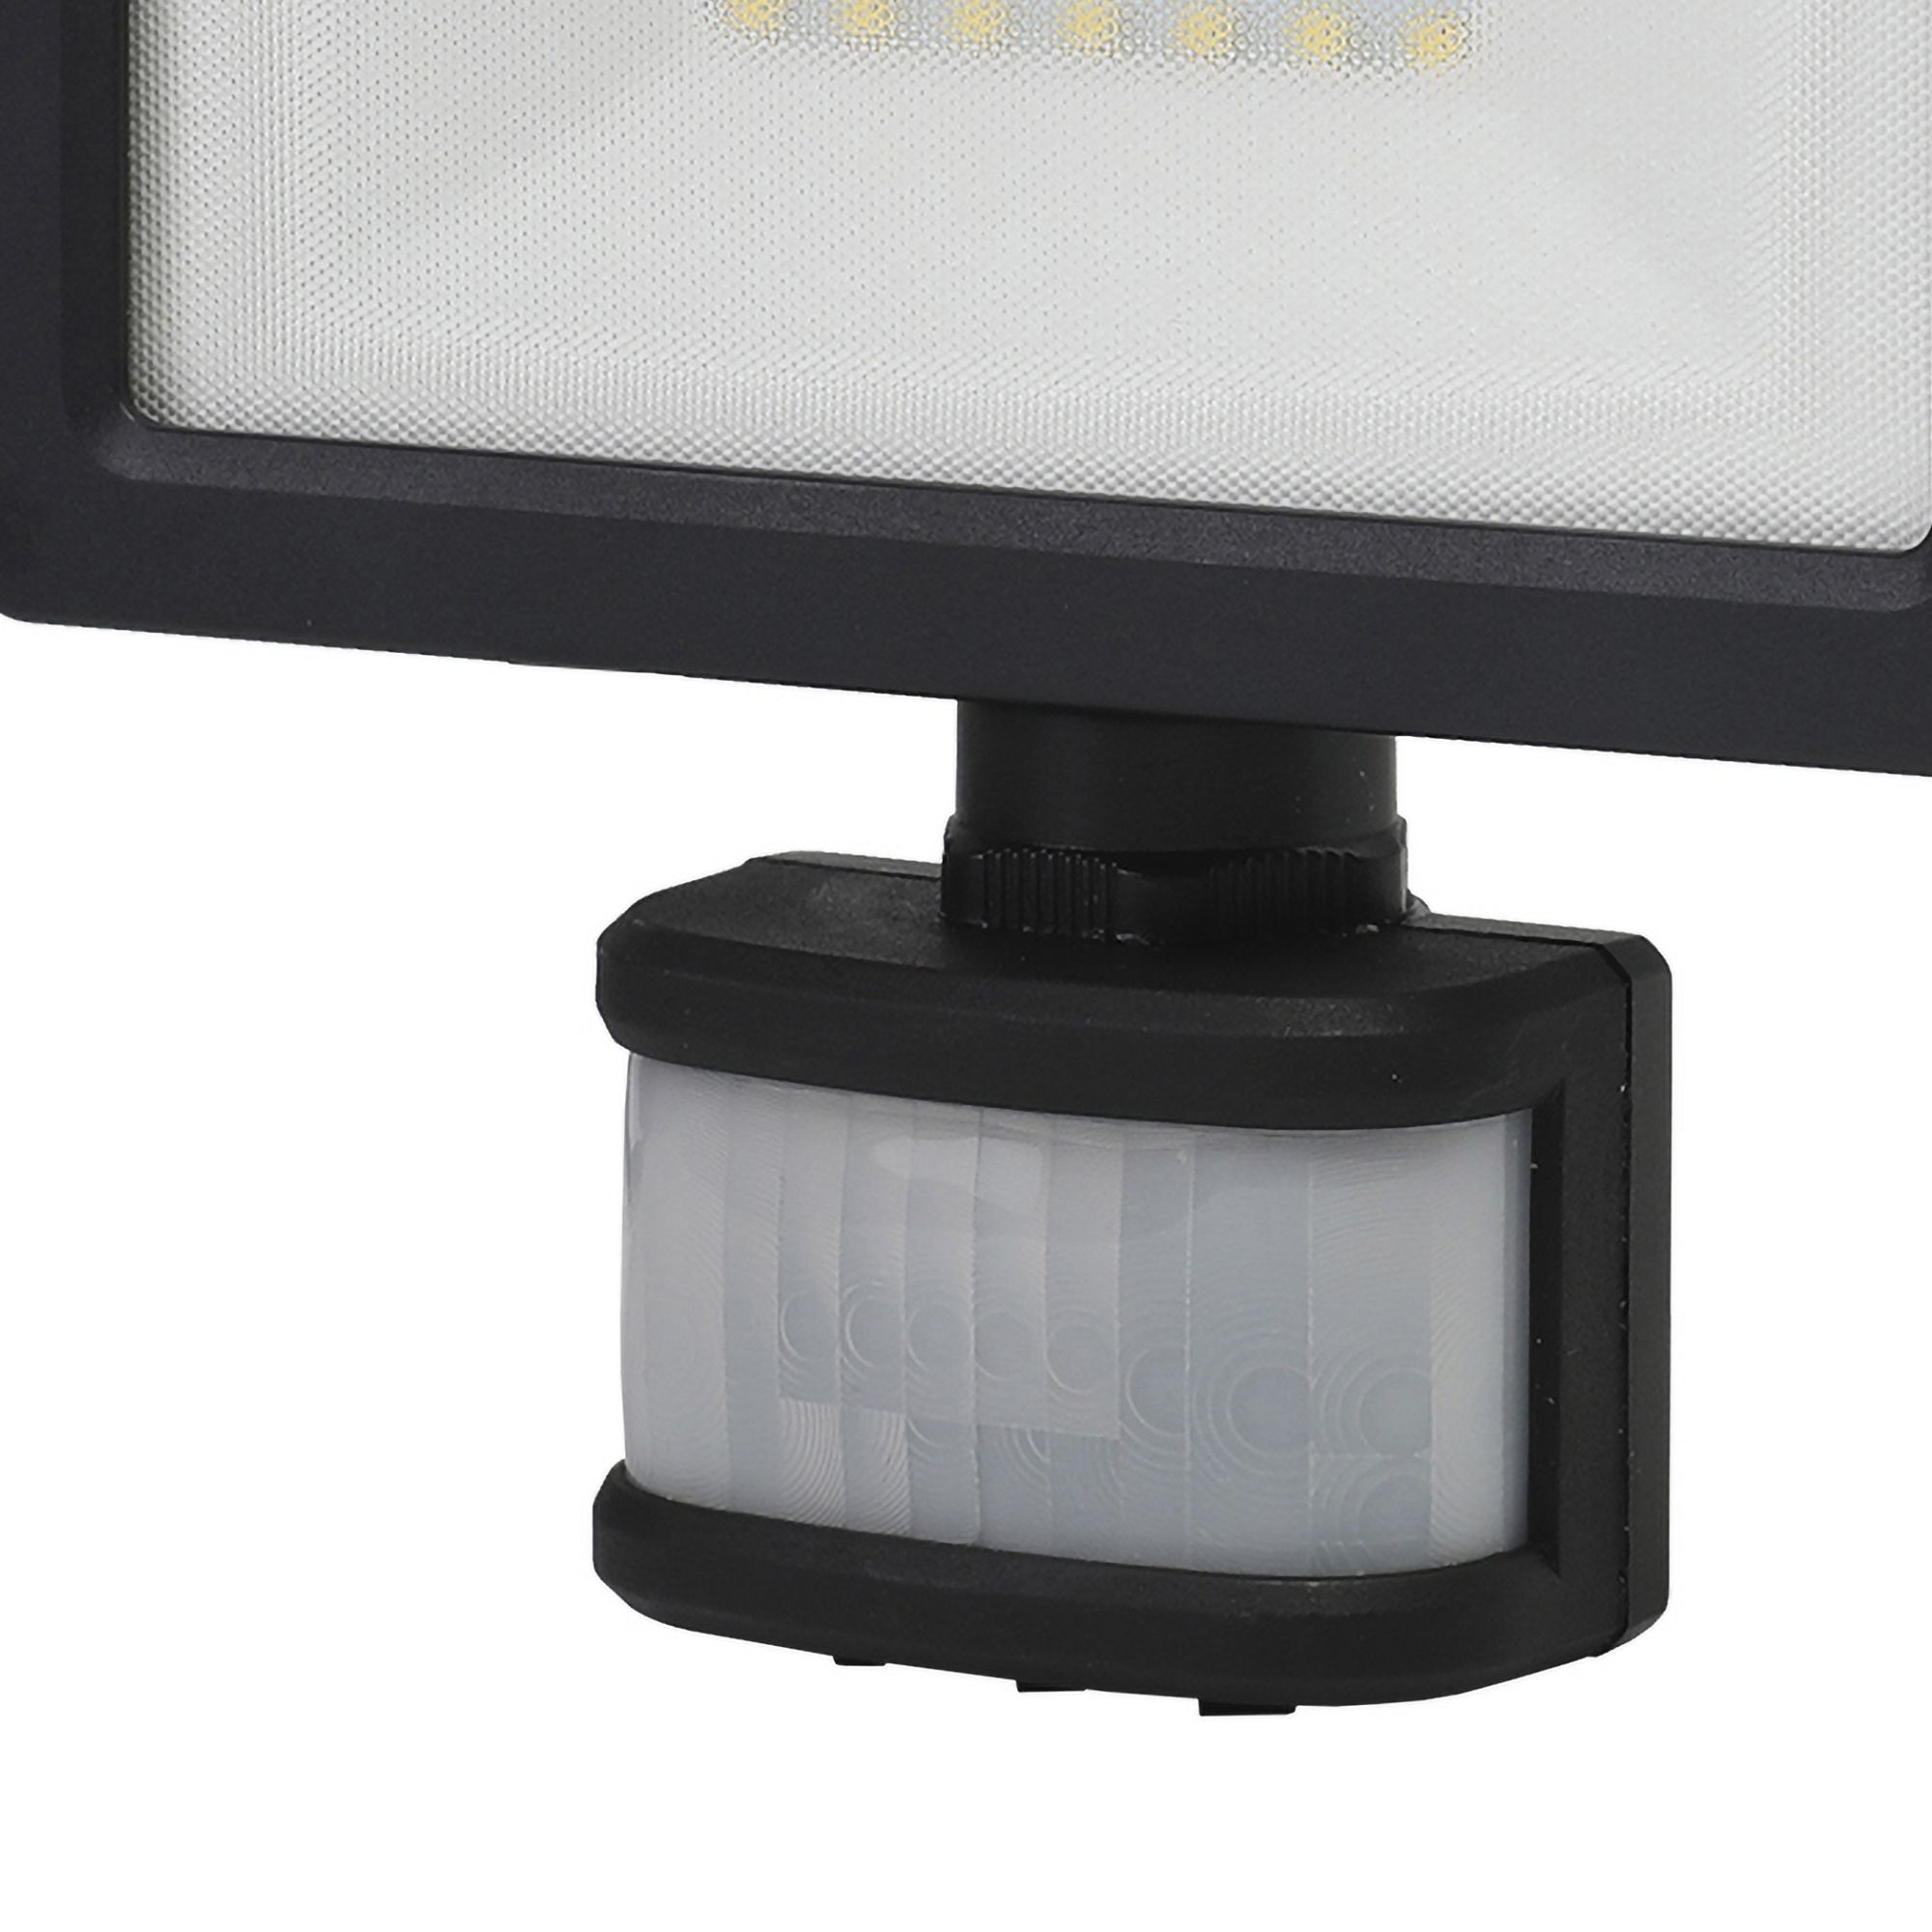 GoodHome Lucan AFD1018-IB Black Mains-powered Cool white Outdoor LED PIR Floodlight 2000lm